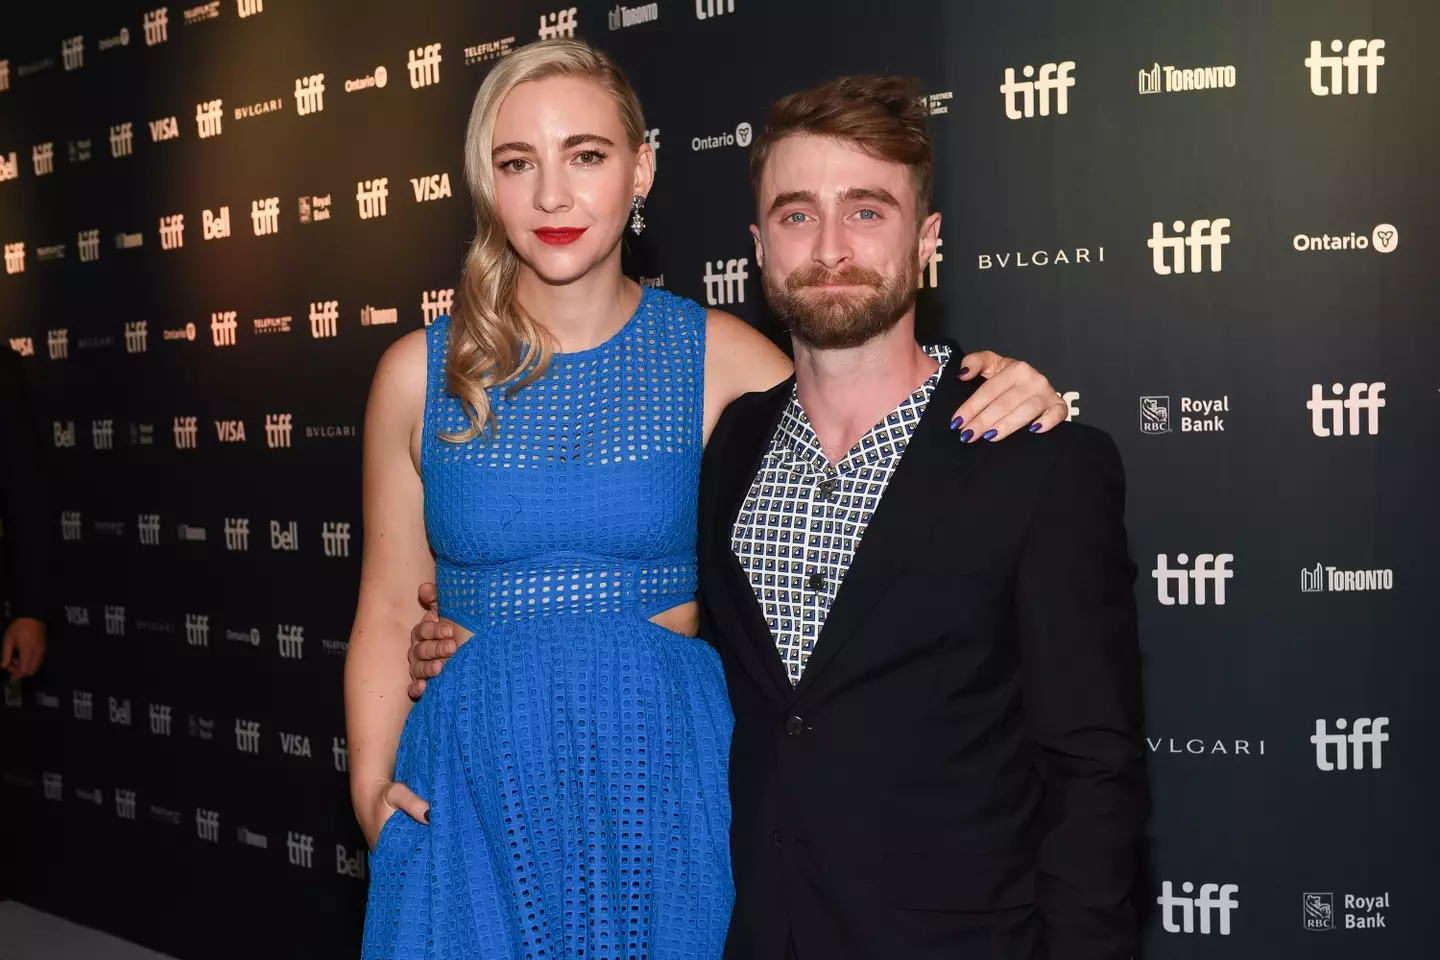 Daniel Radcliffe and Erin Darke have dated for over a decade.